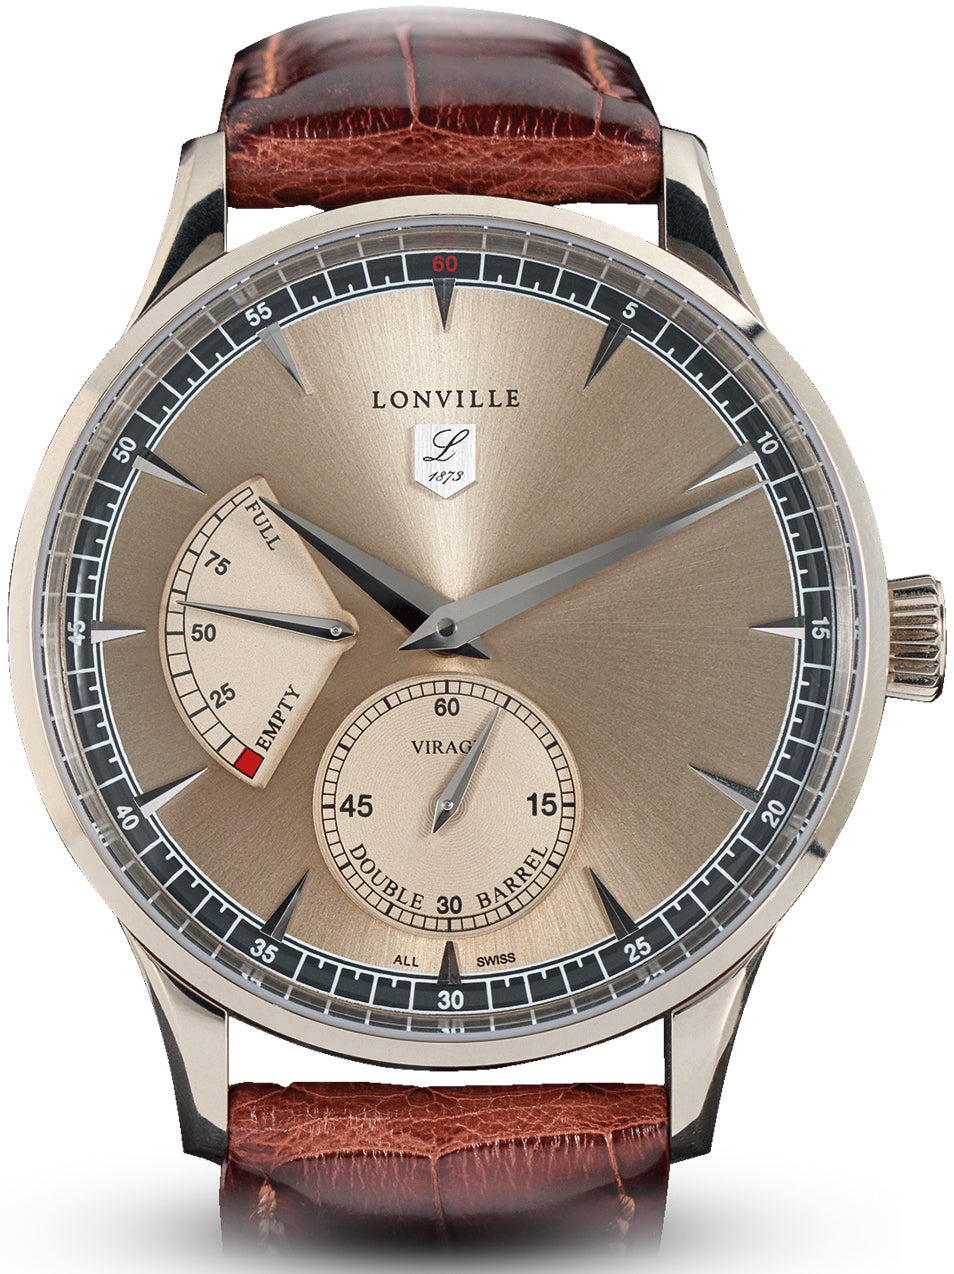 Lonville Watch Virage Fuel Tank Limited Edition